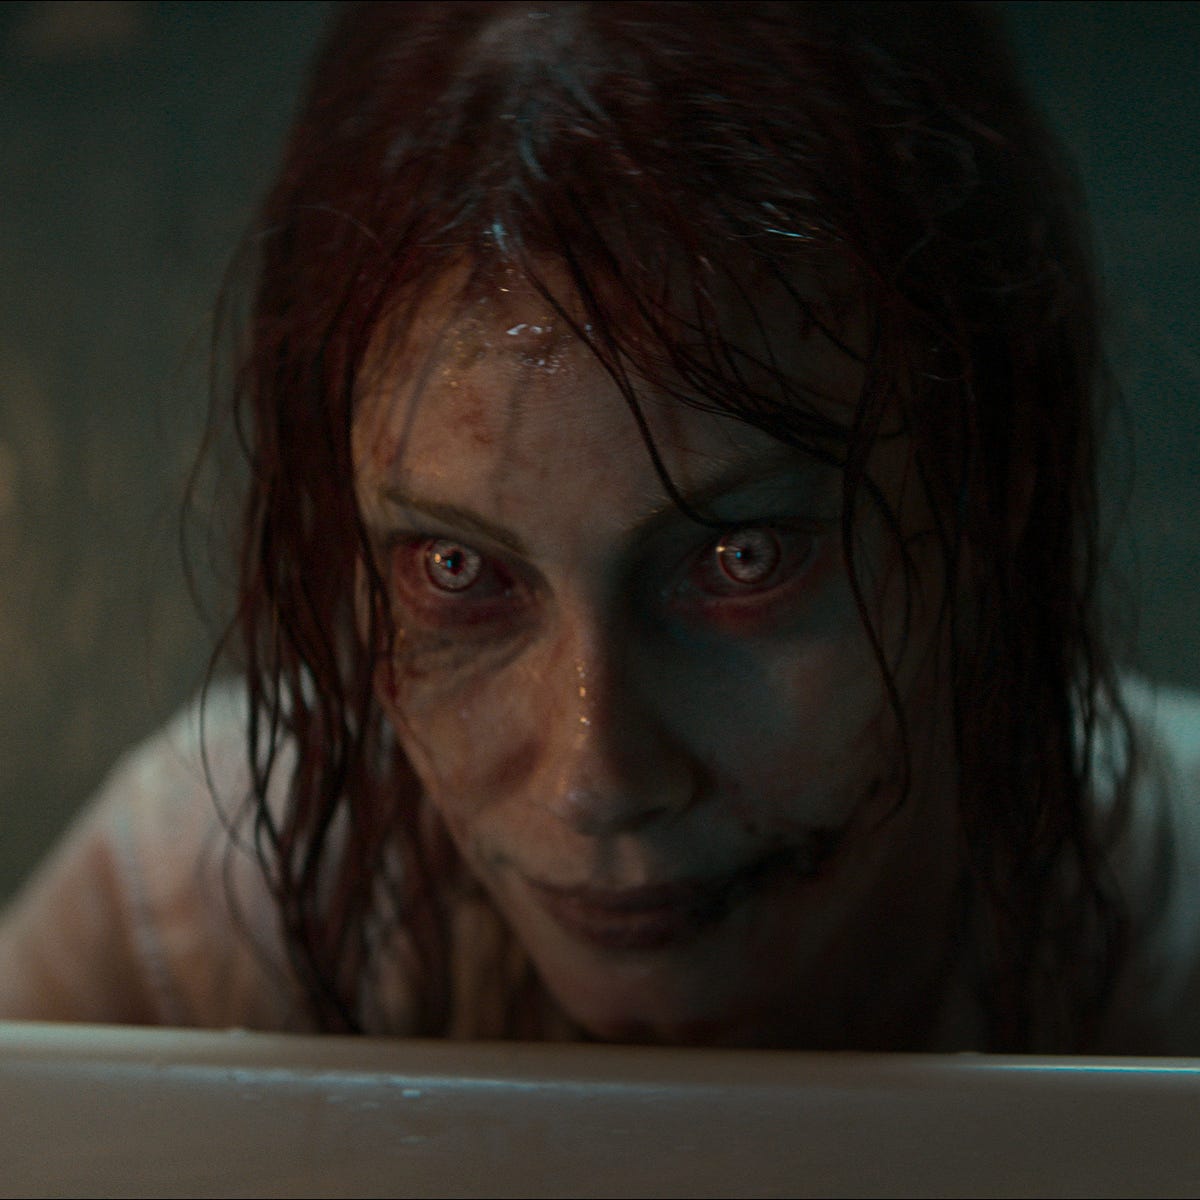 Watch the 'Evil Dead Rise' Trailer, in All Its Gory Glory - CNET